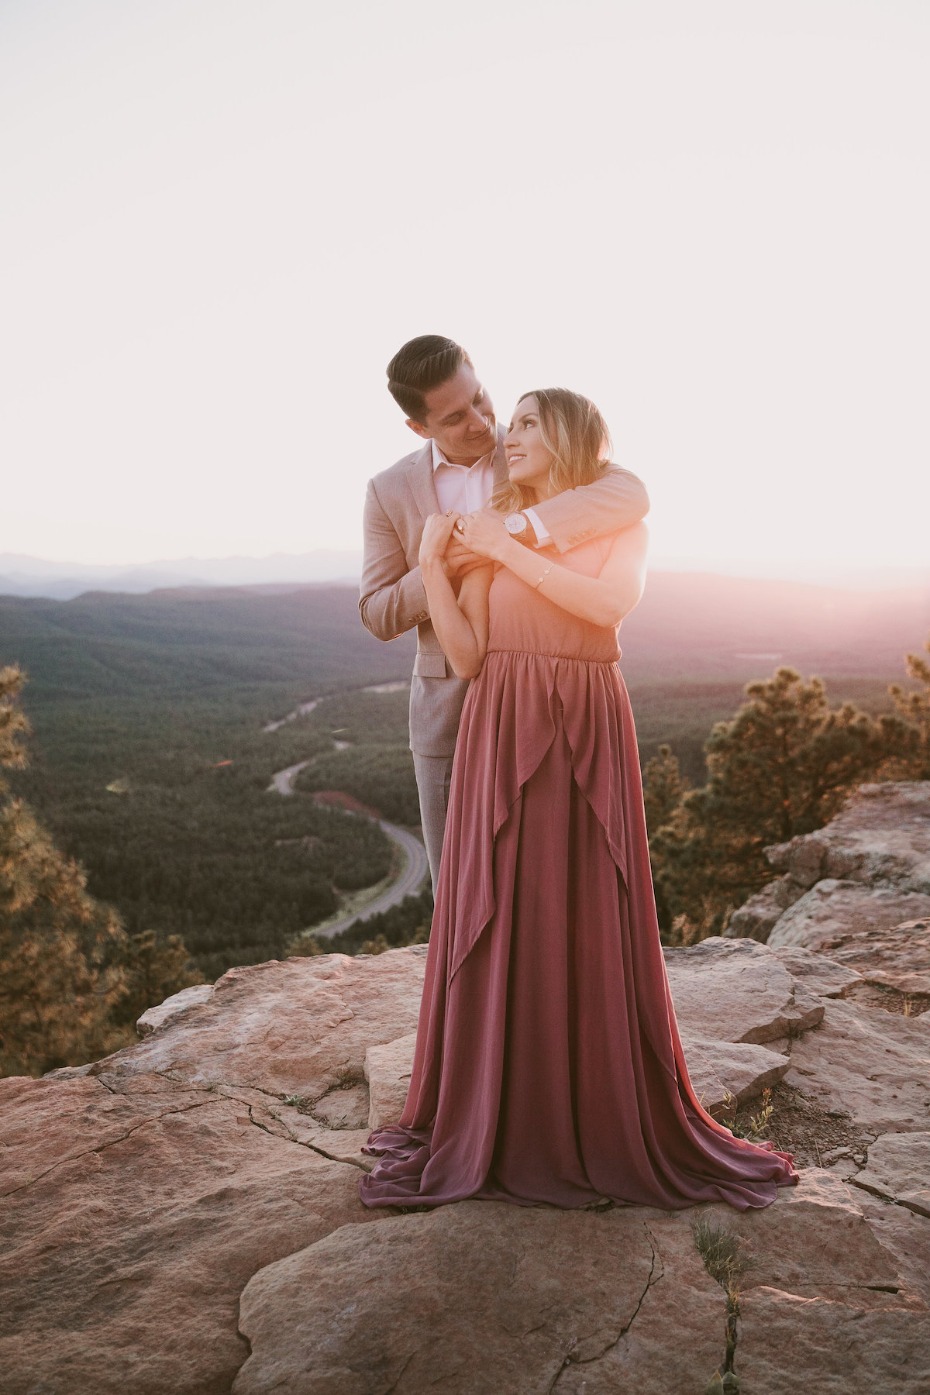 This Sunset Engagement Shoot Will Make You Want To Take A Road Trip